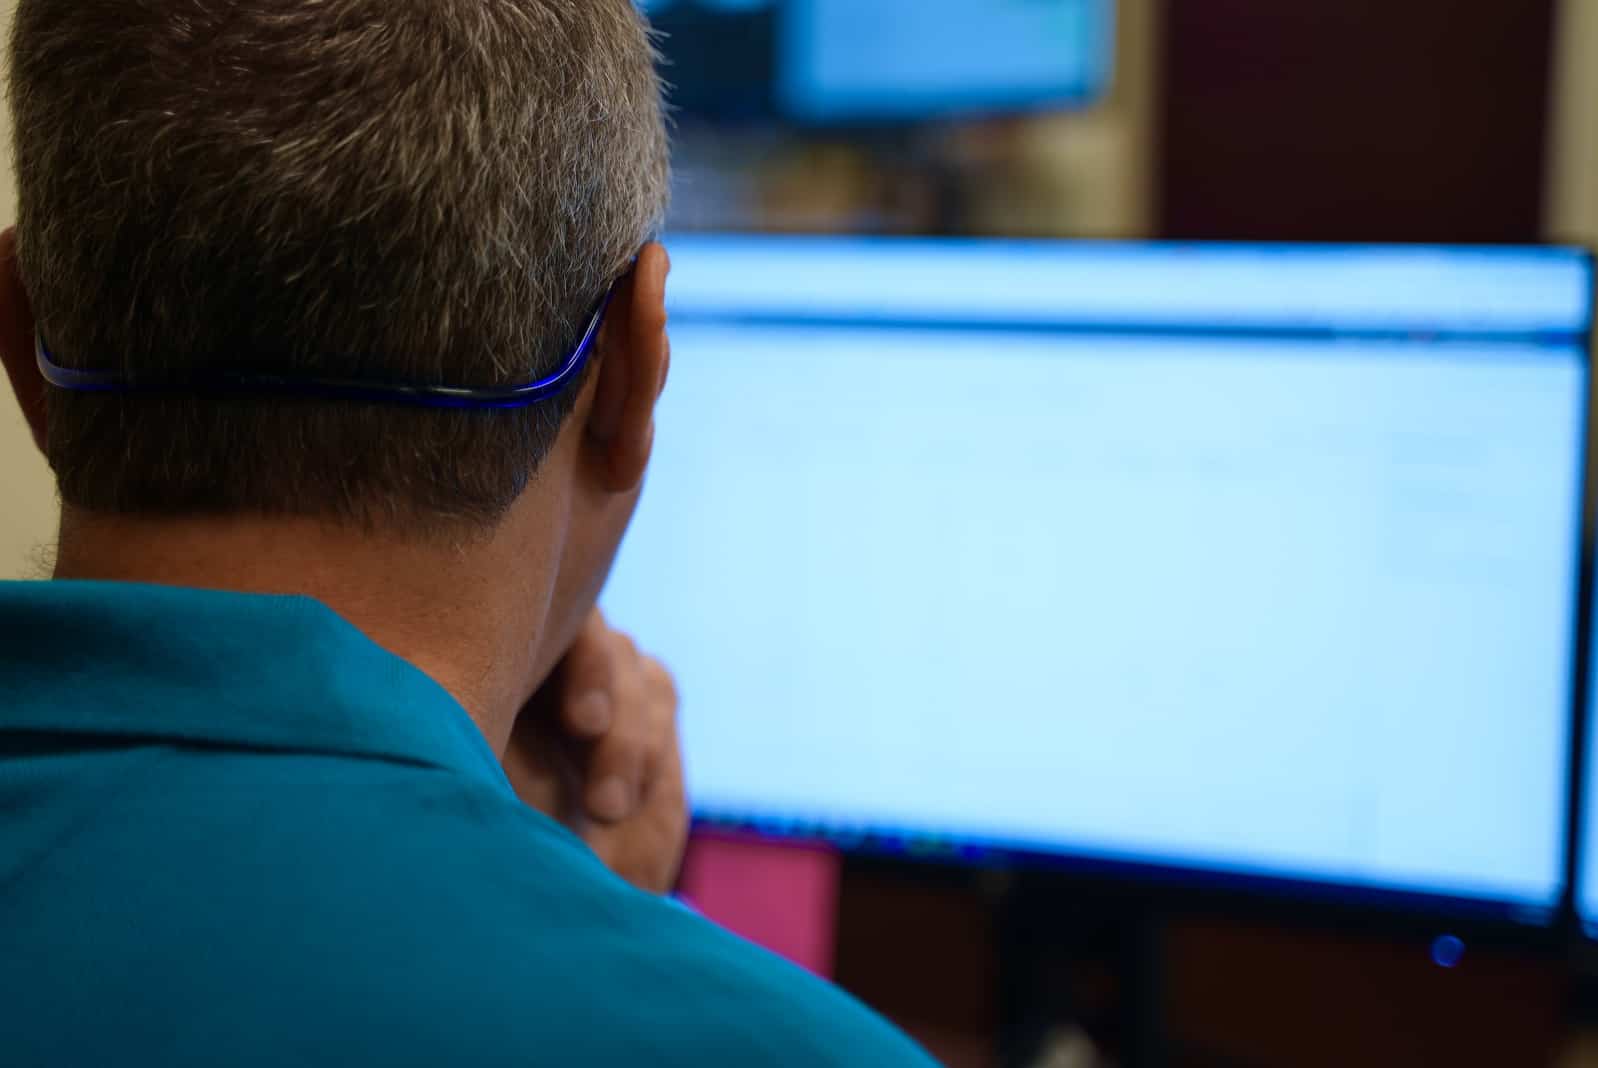 Blue Light IT team member inspecting code on a computer monitor